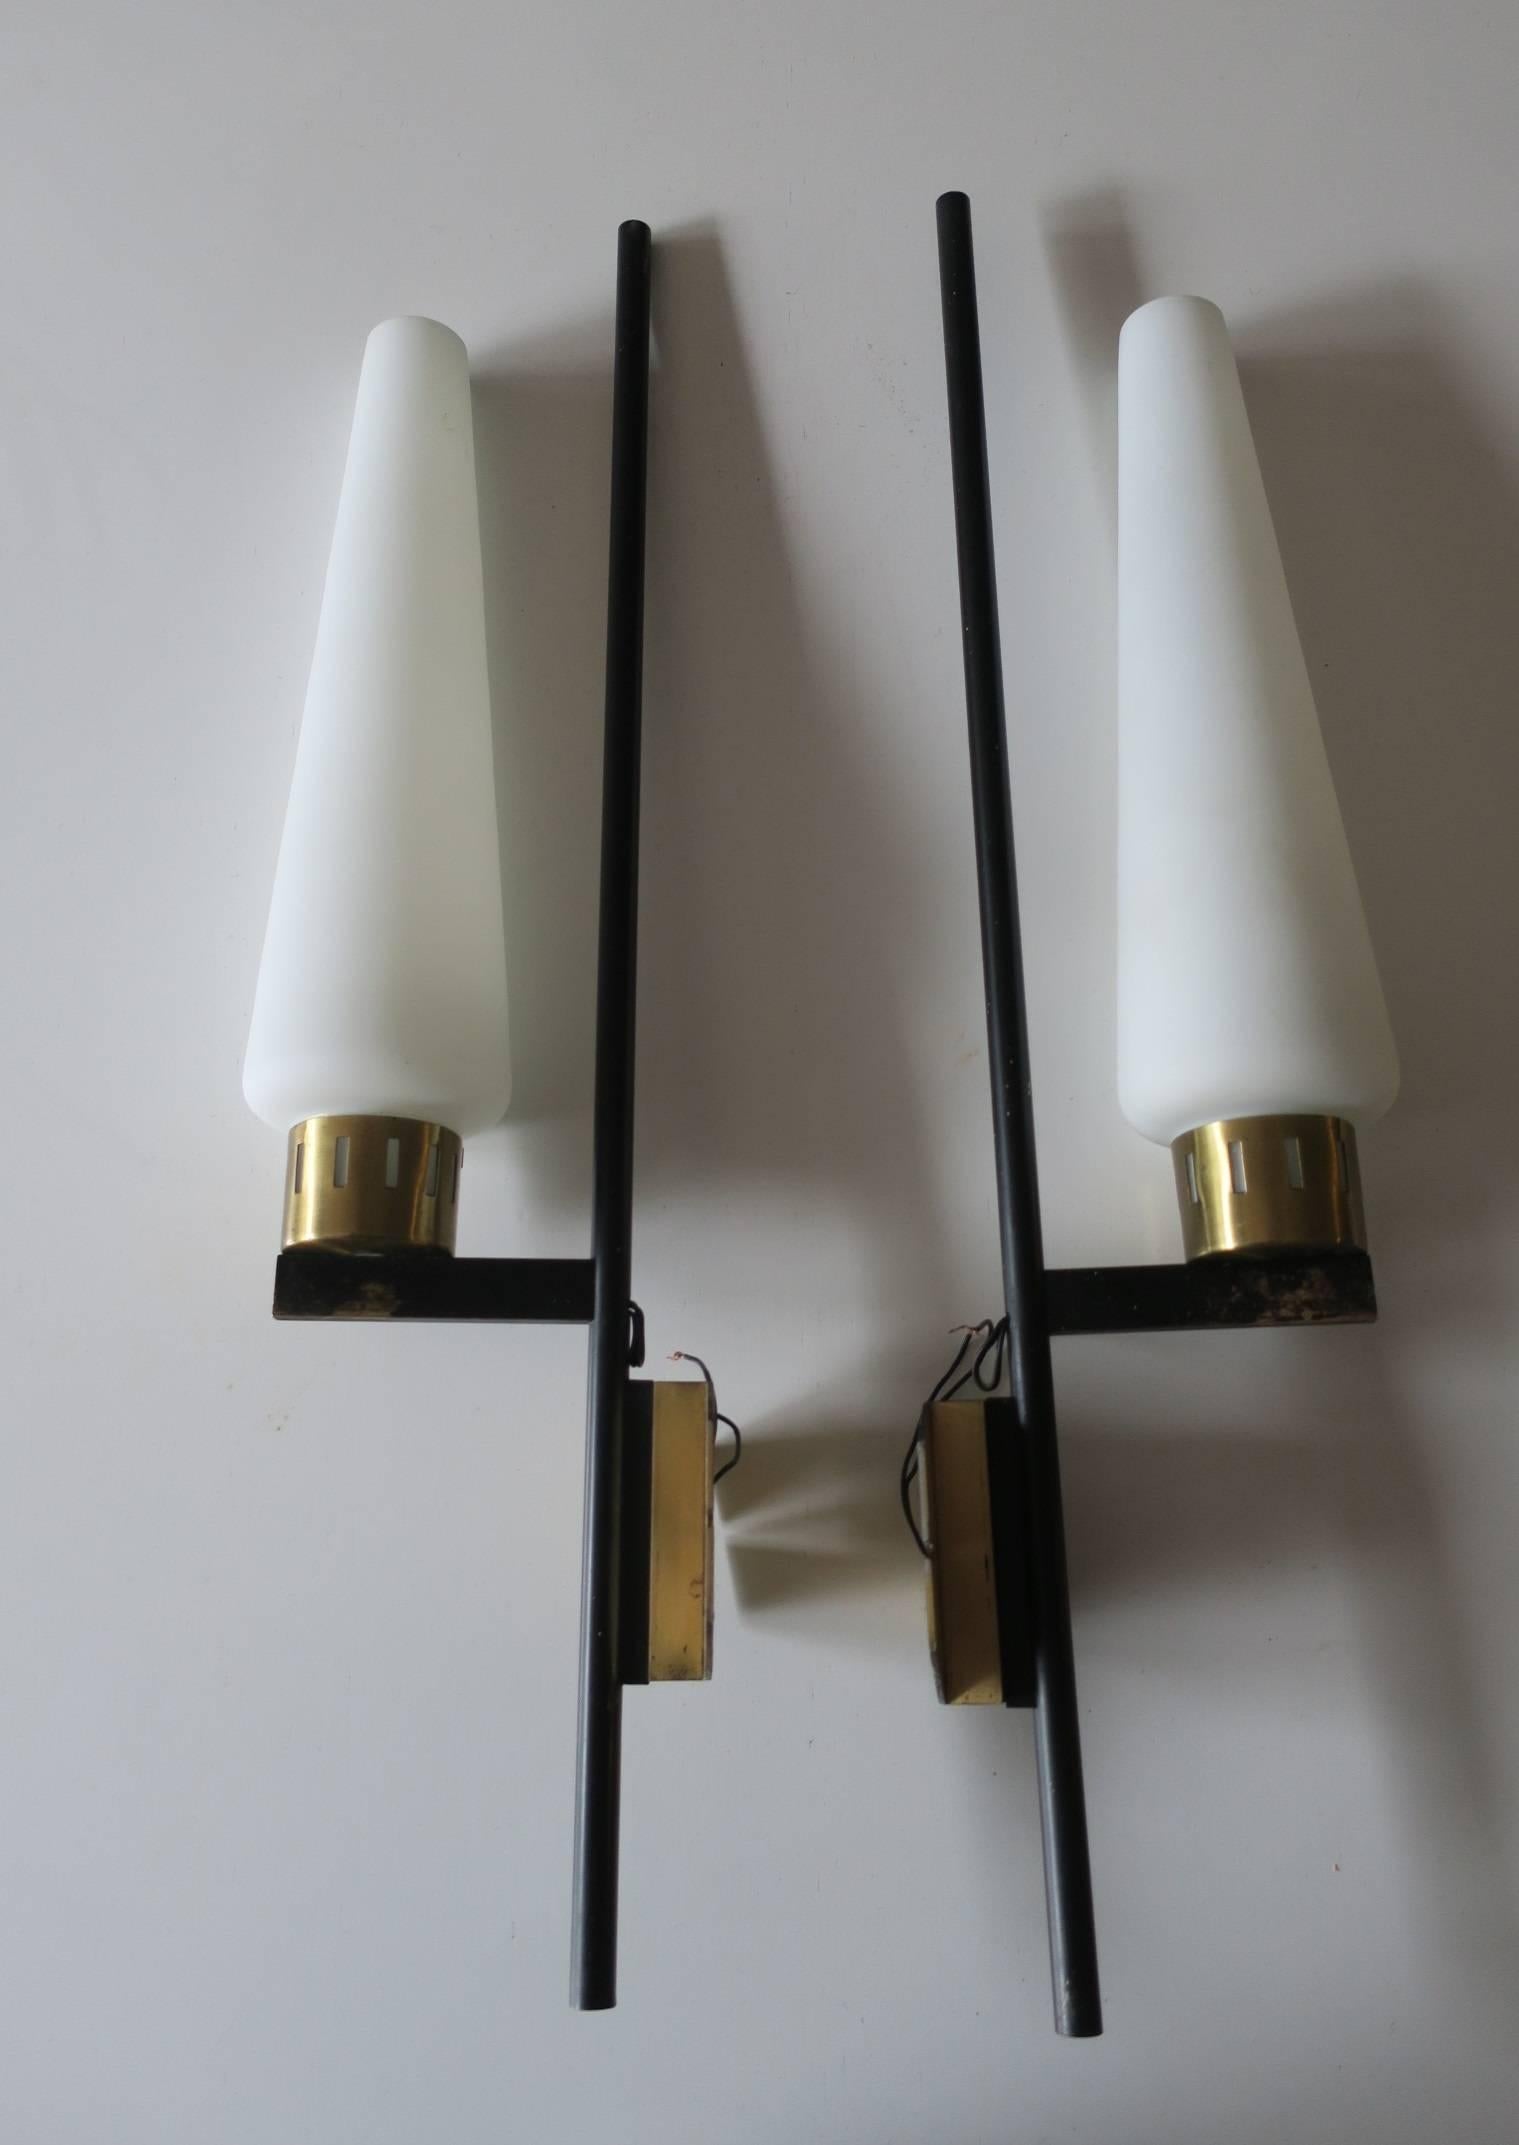 Pair of elegant Italian brass and glass sconces with slender black metal supports on patinated brass frames holding narrow matt milk glass shades.